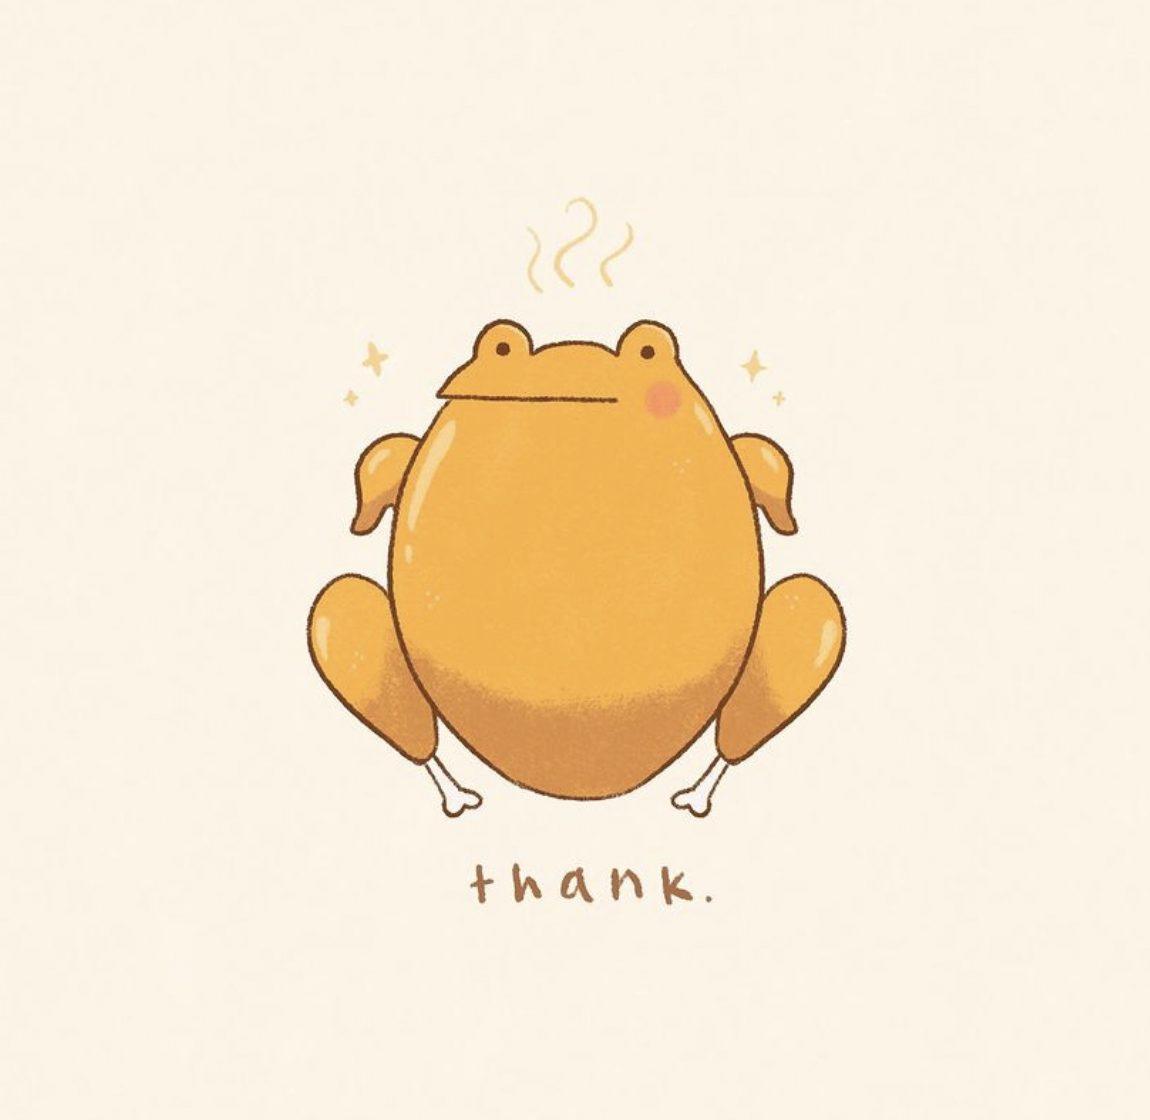 A thankful frog wishes you the best for Spring break!